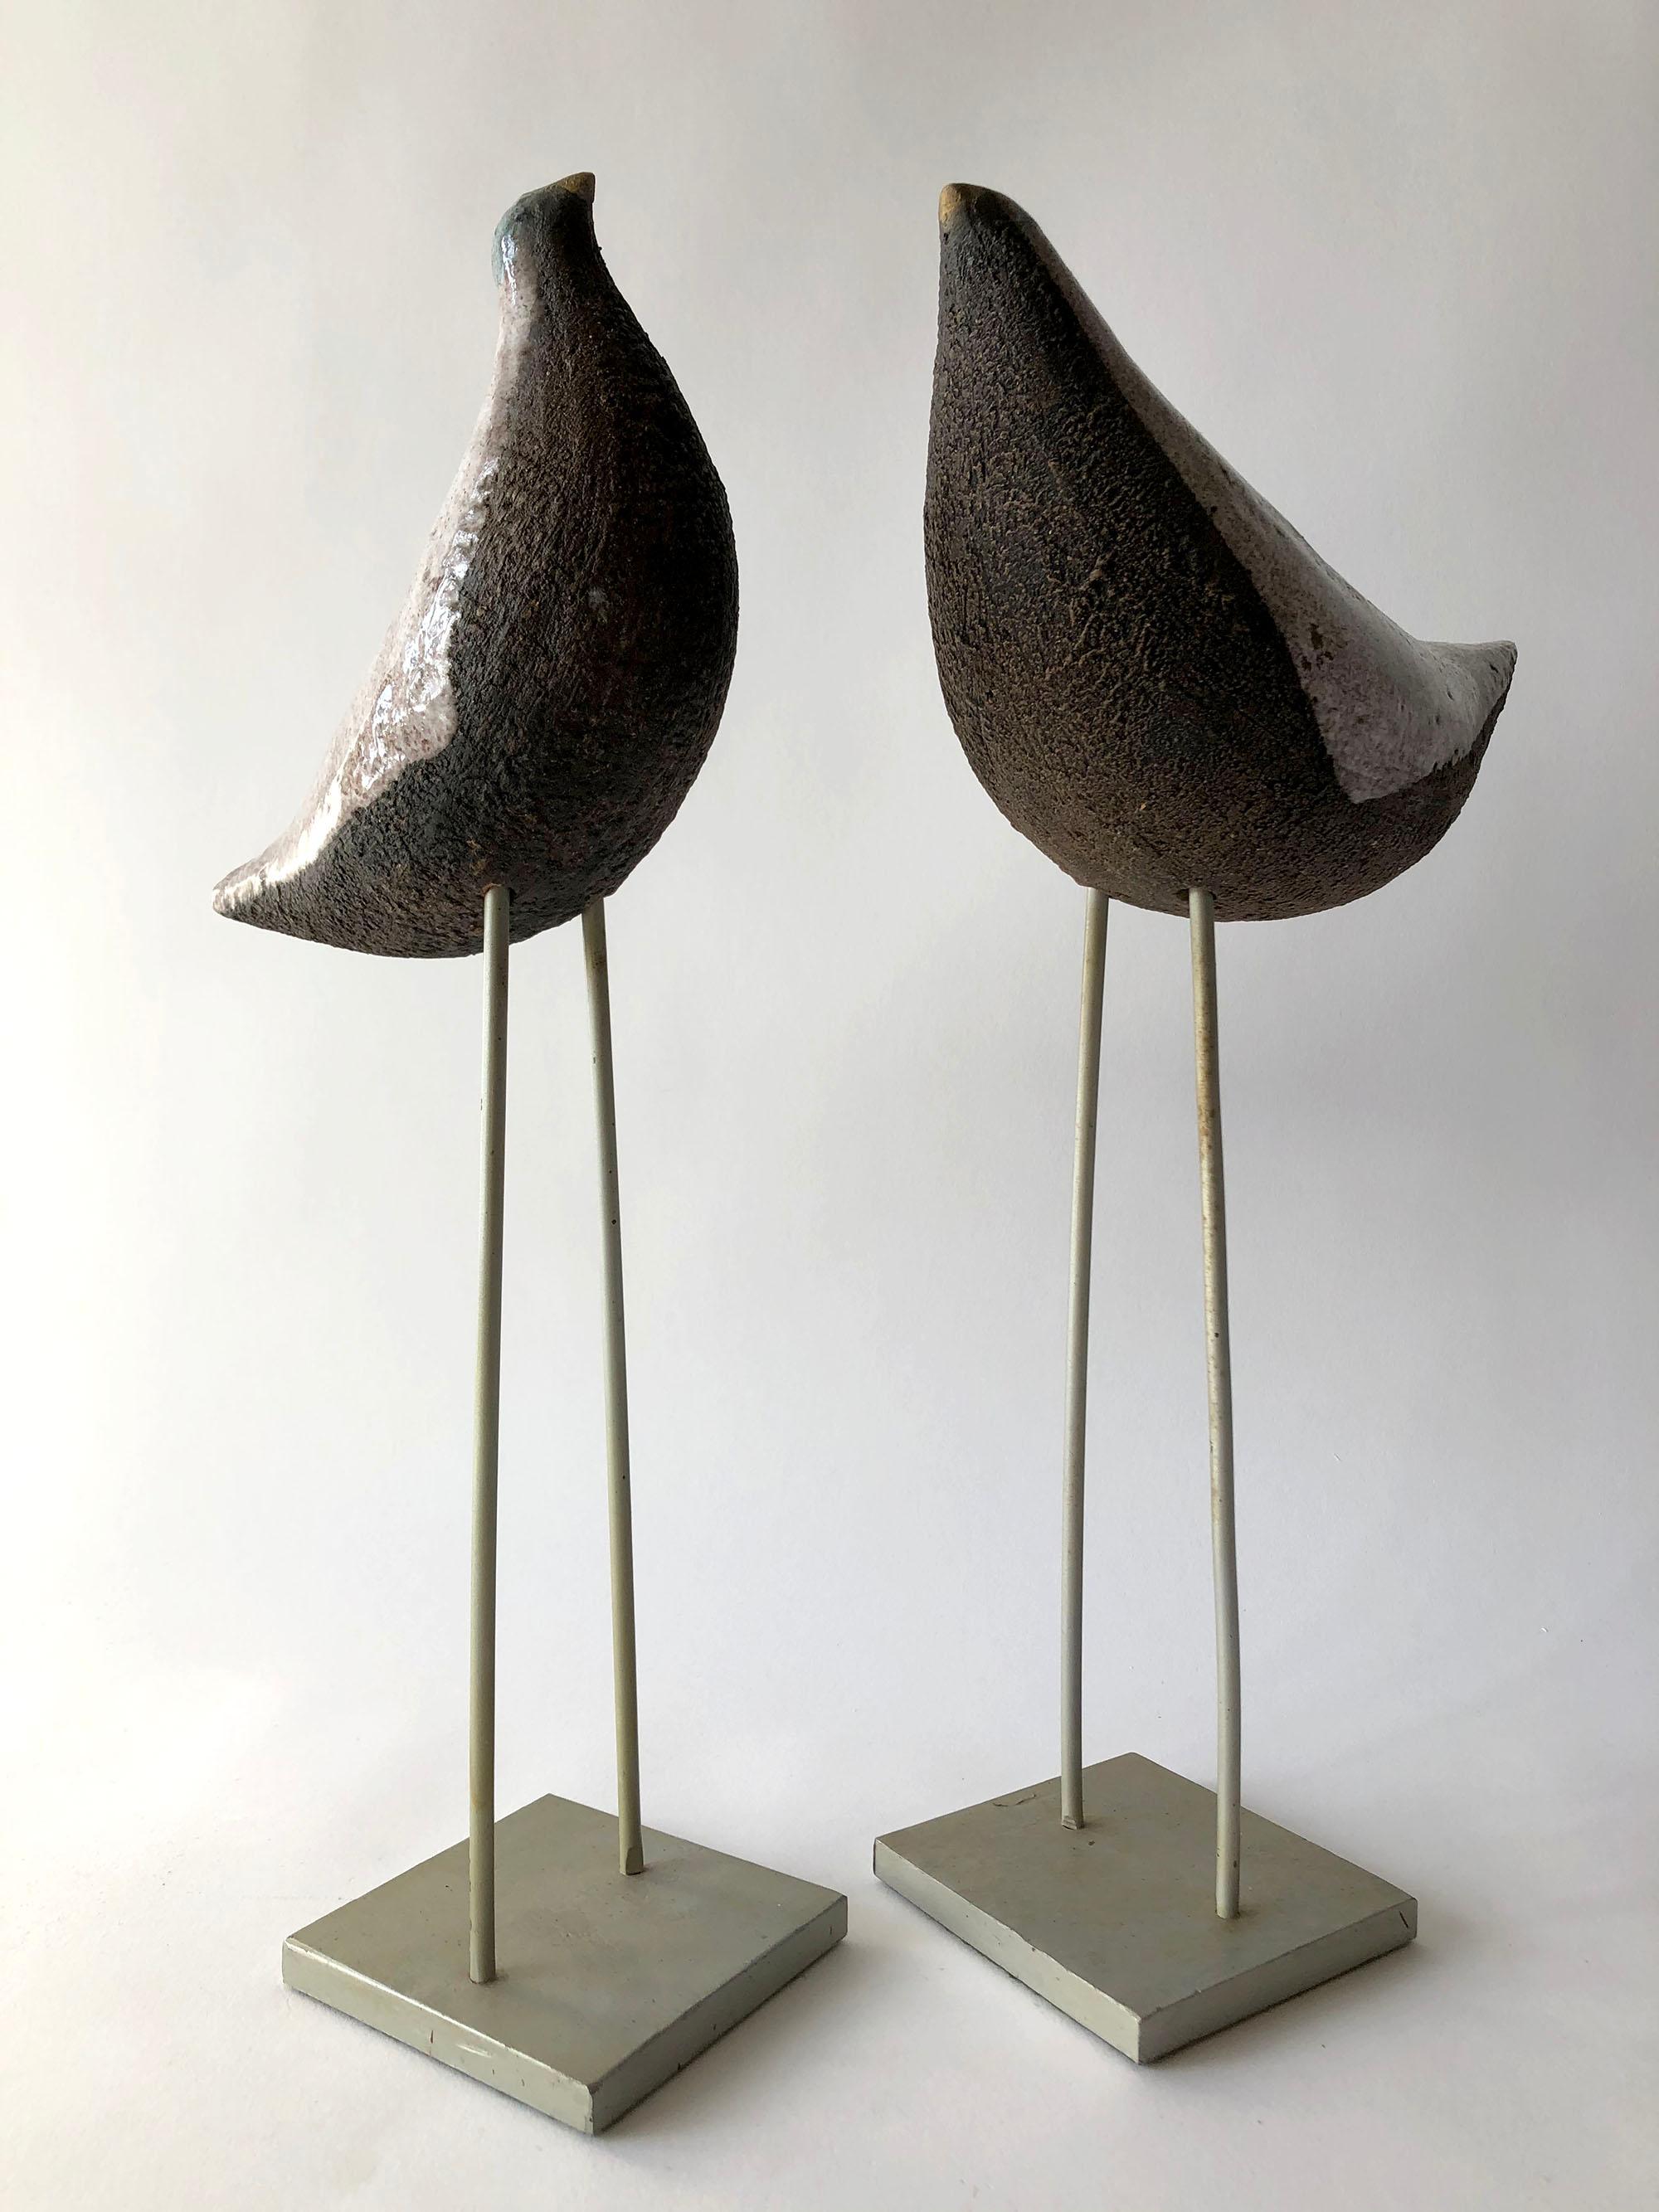 Vintage pair of Aldo Londi for Bitossi bird sculptures, Italy, 1960s. Largest measurements are 14.5